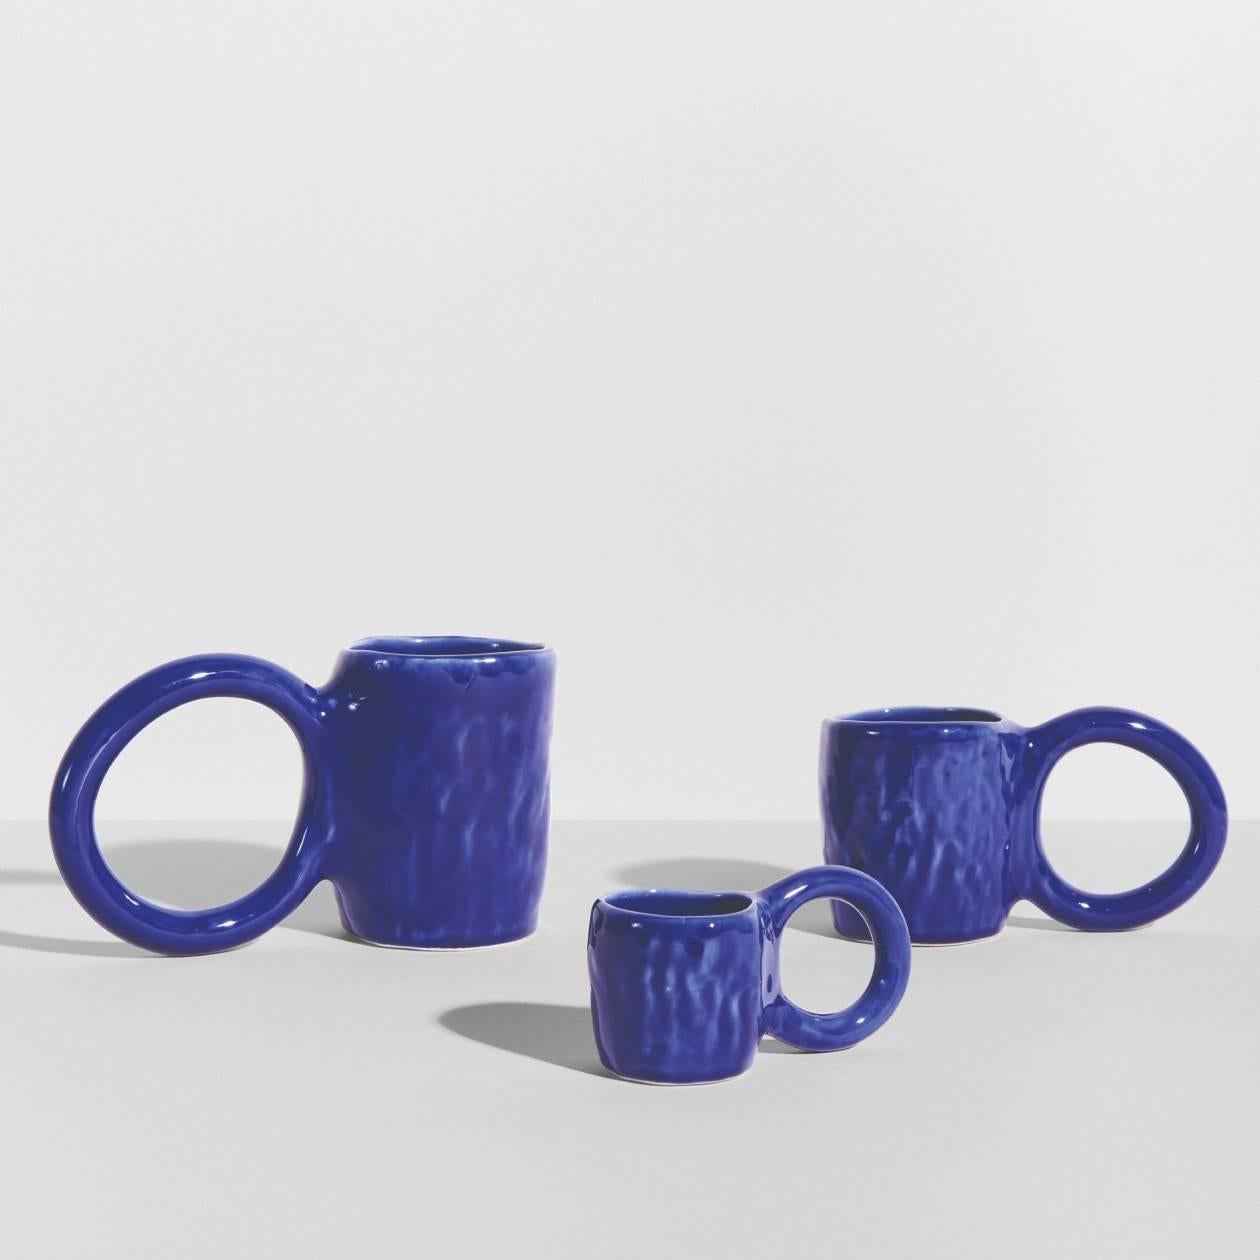 Glazed PETITE FRITURE Donut, Set of 2 Espresso, Blue, Designed by Pia Chevalier For Sale